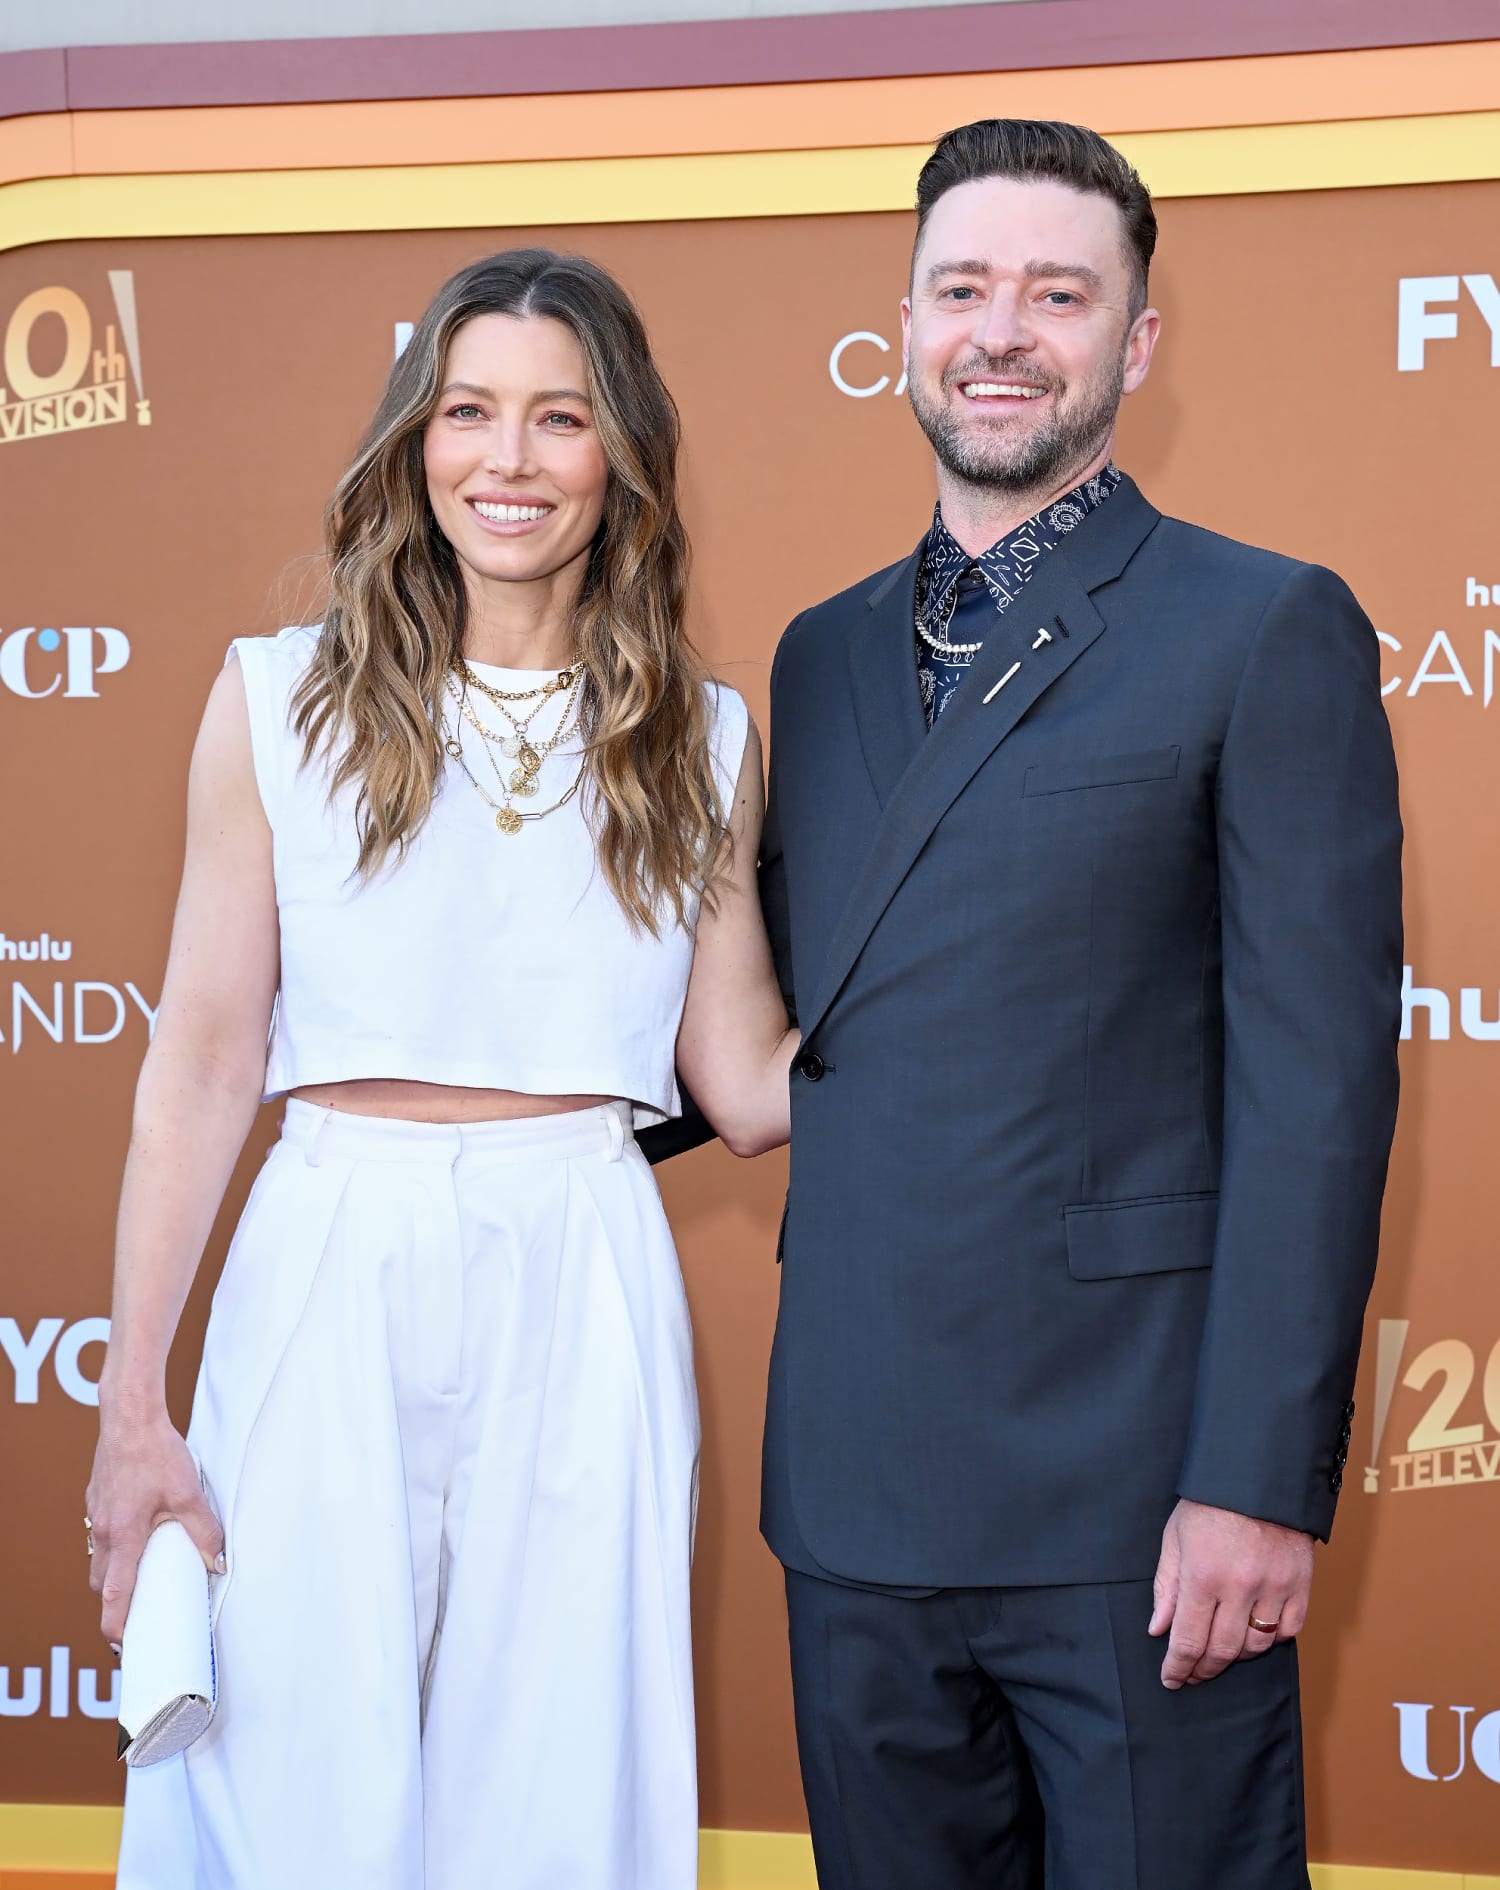 Jessica Biel shares photos of Justin Timberlake, their kids in